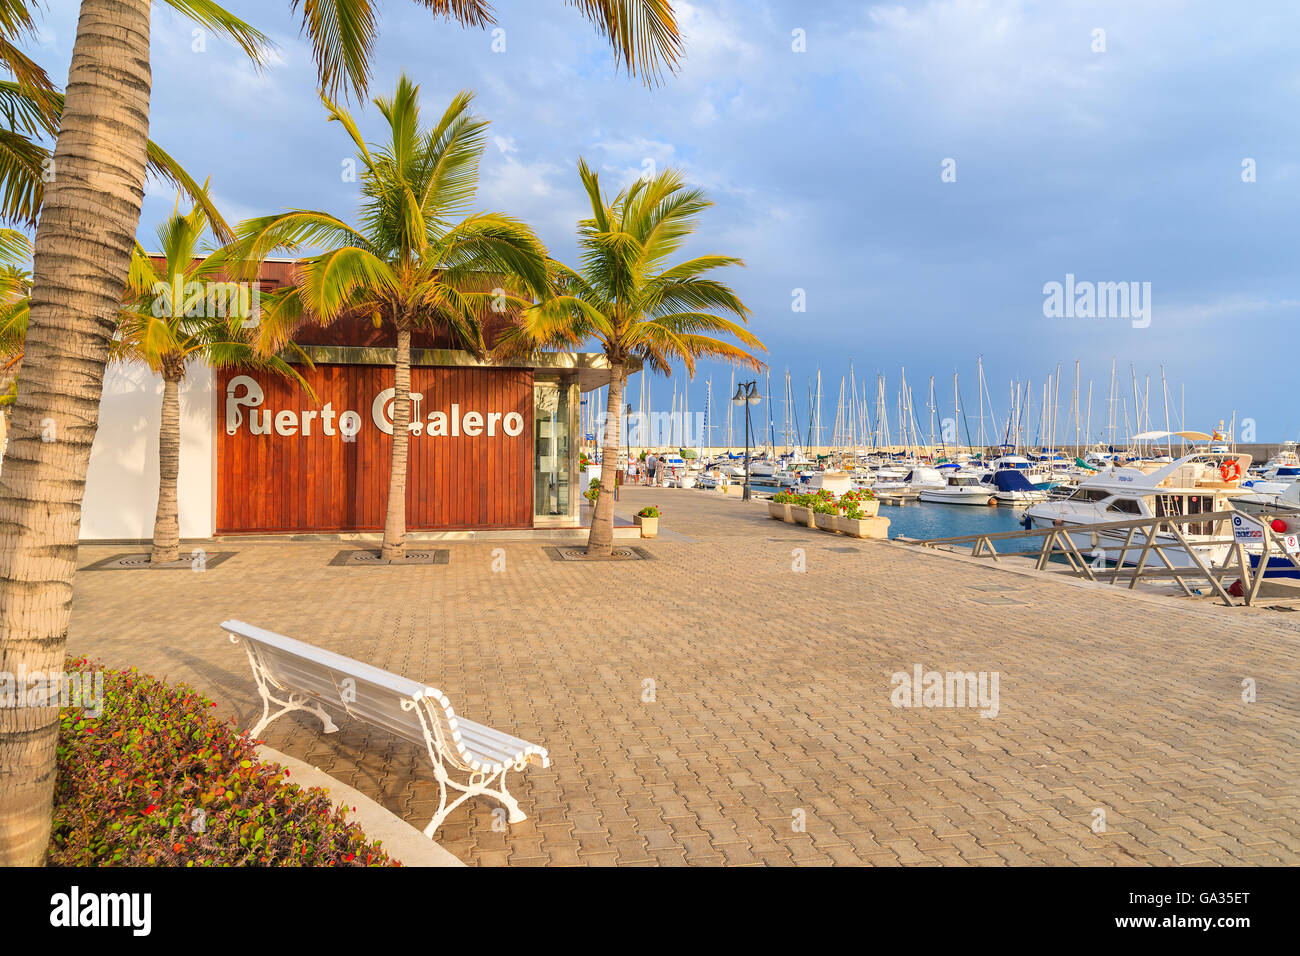 PUERTO CALERO MARINA, LANZAROTE ISLAND - JAN 12, 2015: bench and palm trees in Puerto Calero port built in Caribbean style. This is modern yacht marina which is visted by many tourists. Stock Photo